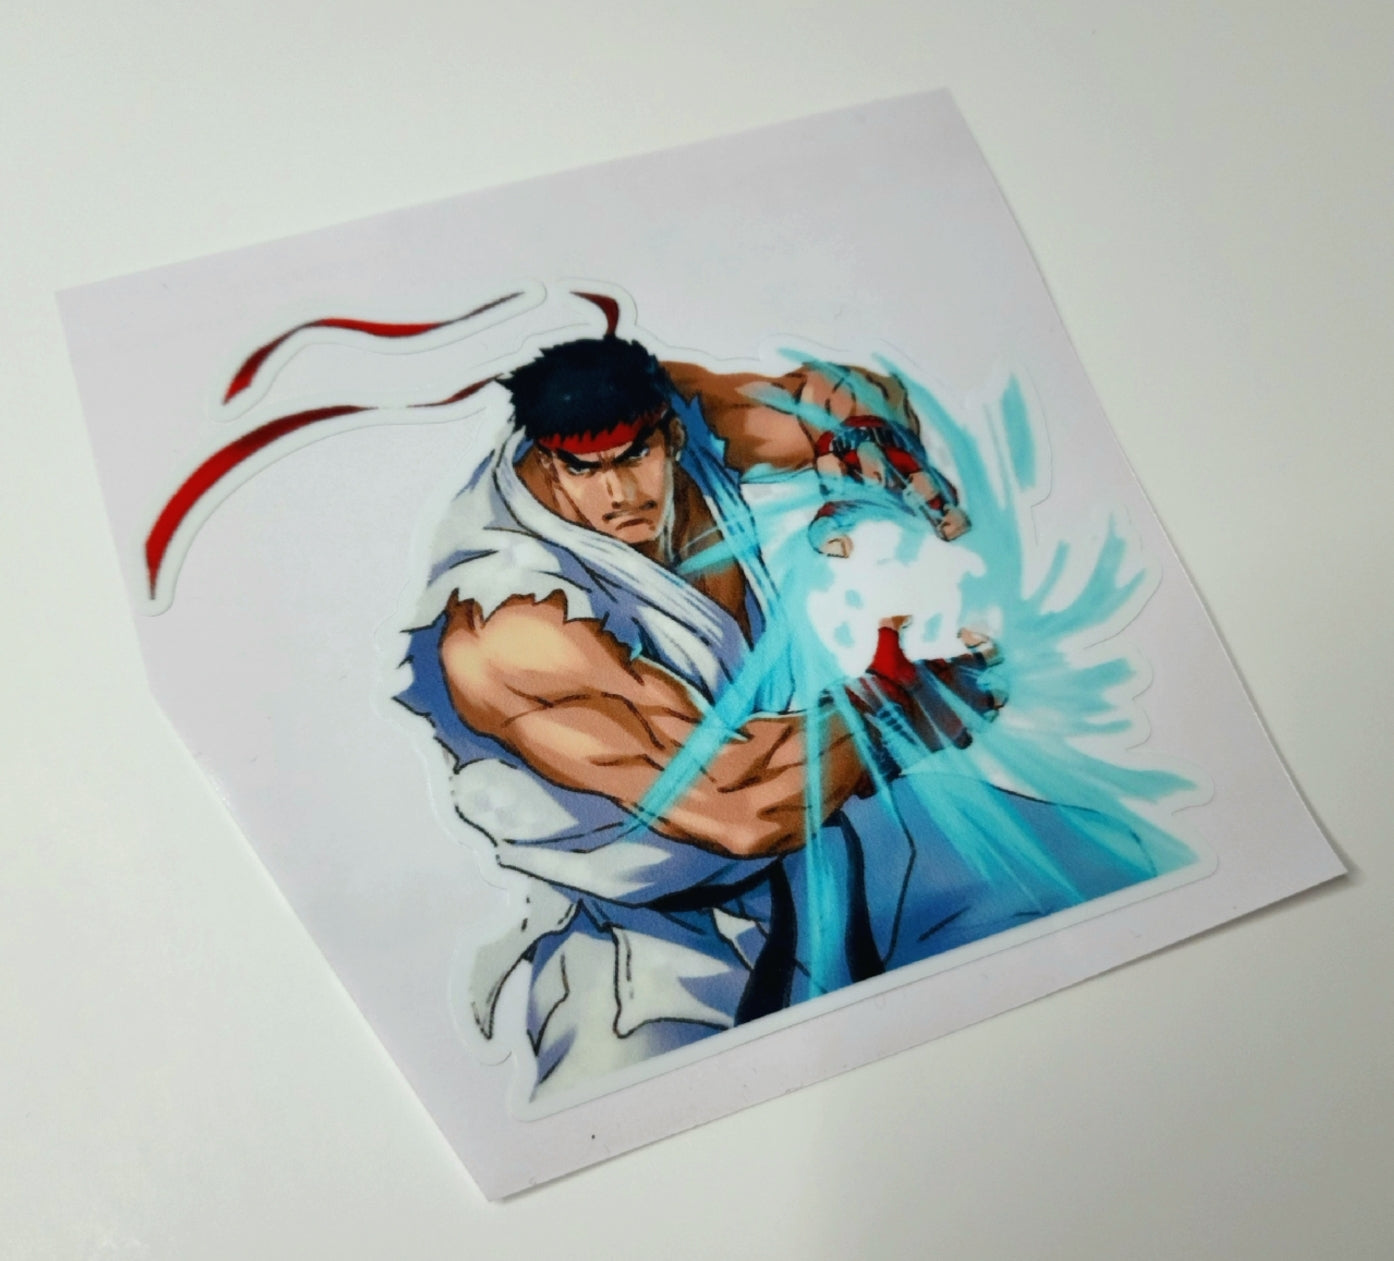 Ryu (Street Fighter) Art Gallery - Page 5